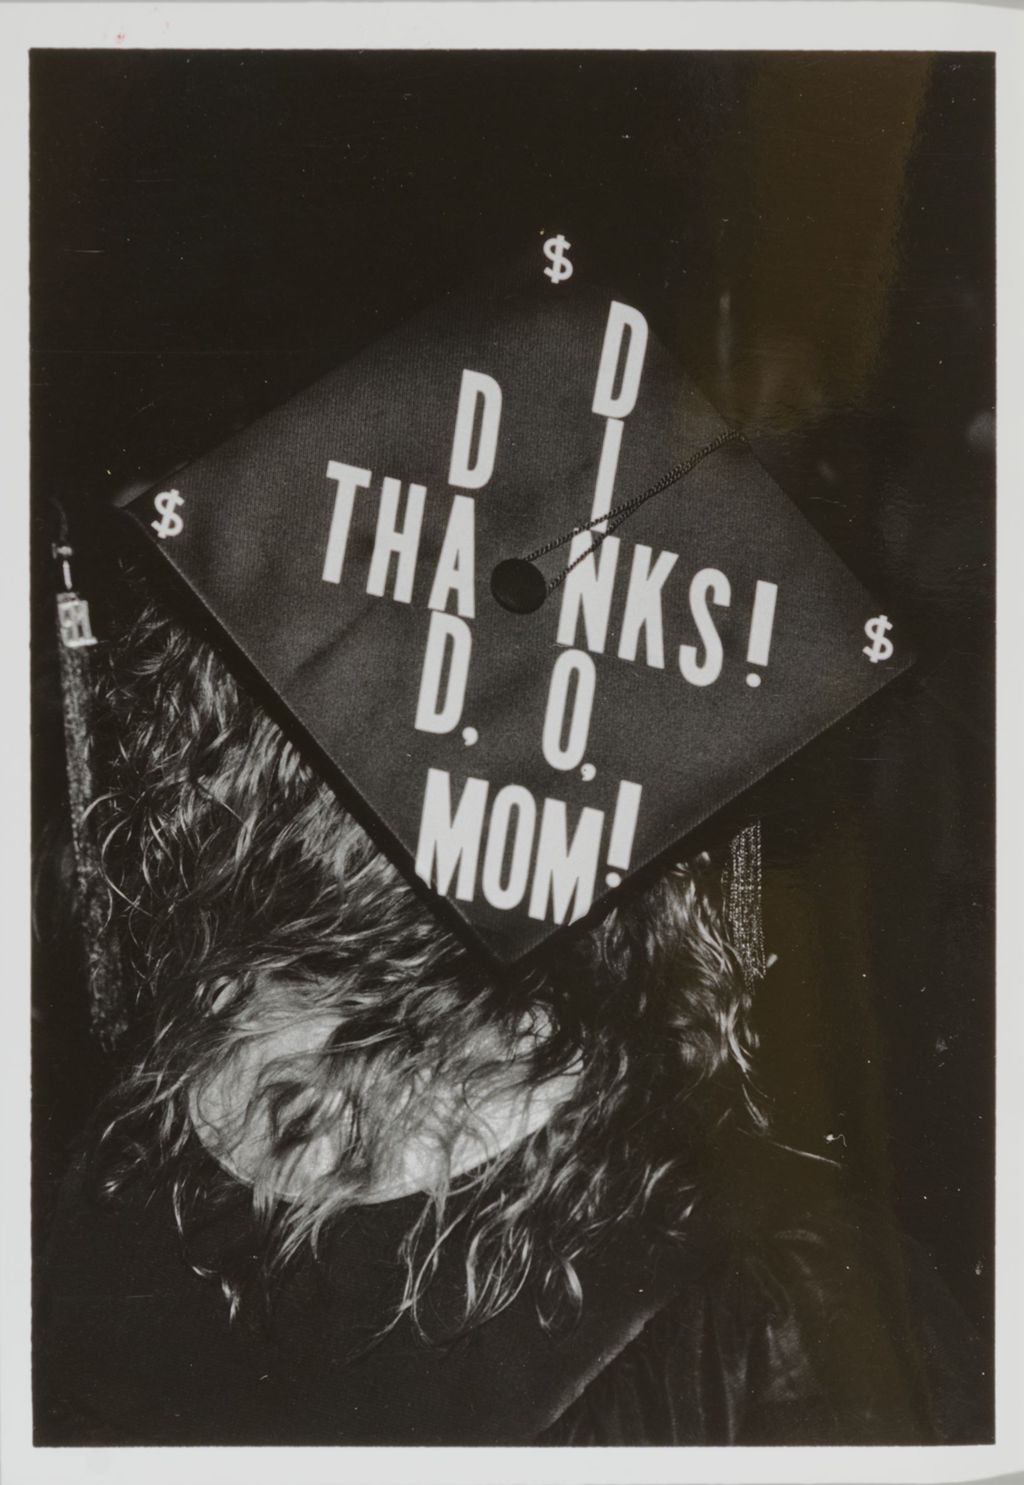 Decorated mortarboard at the graduation ceremony